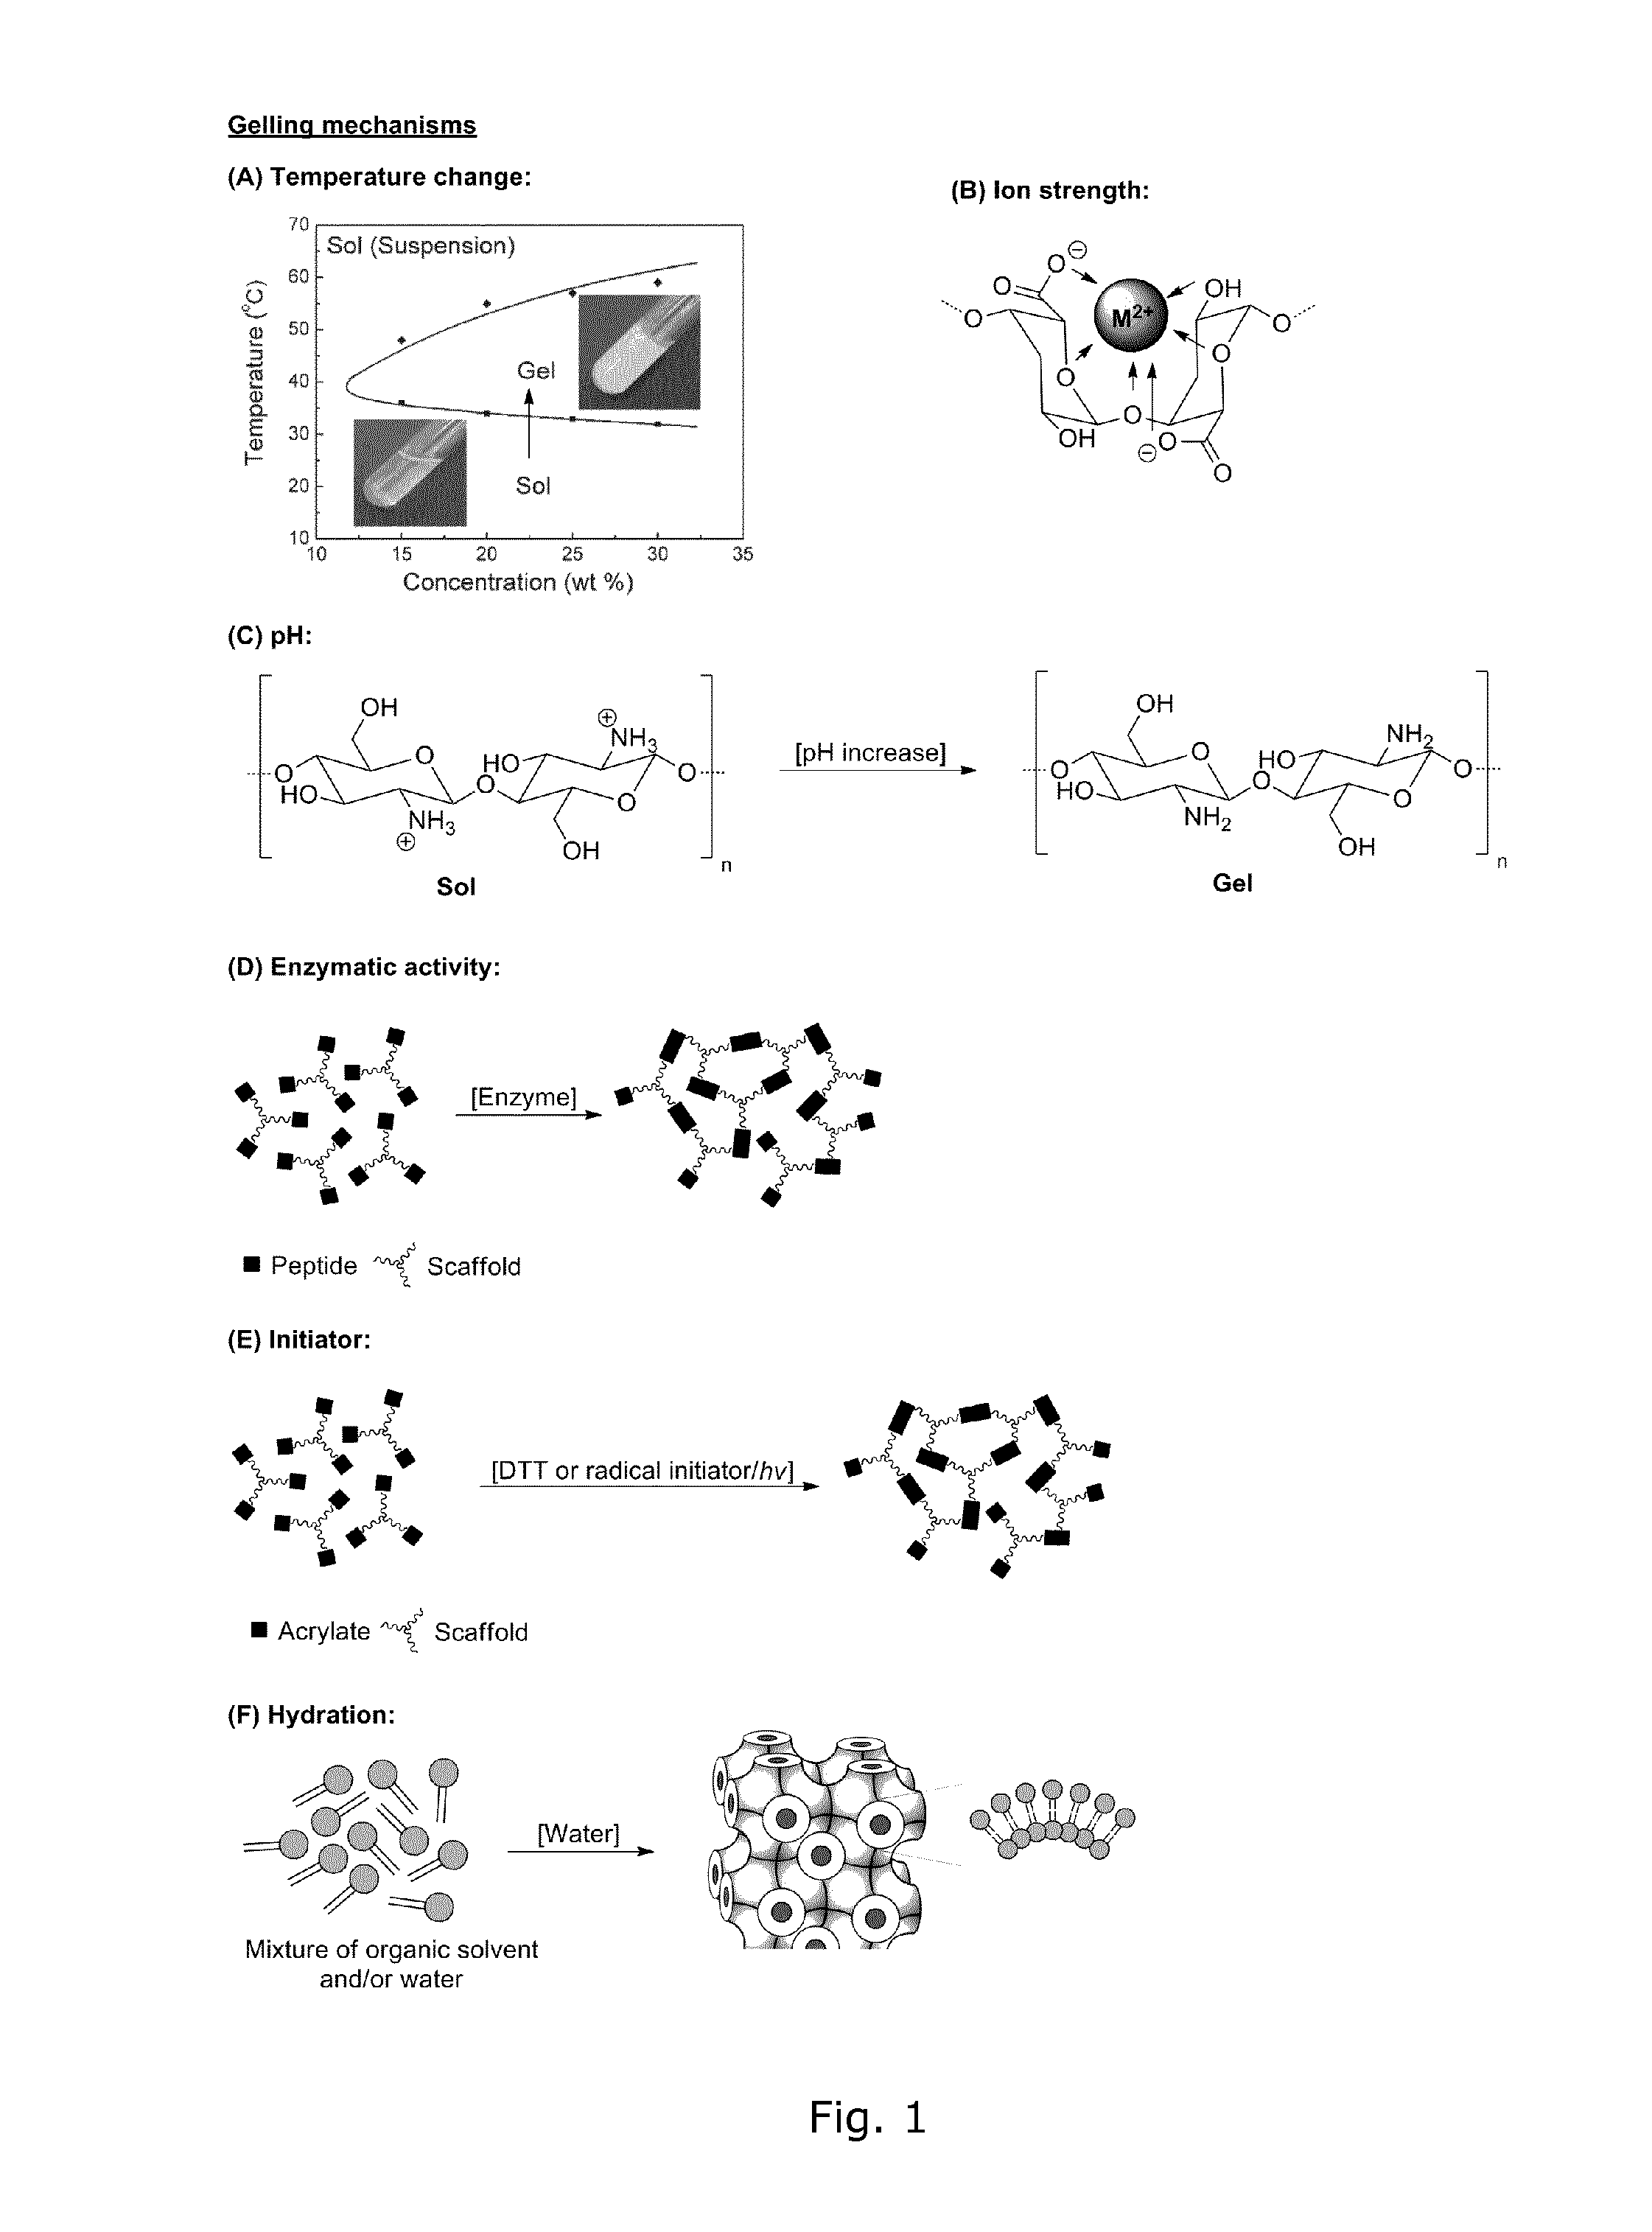 Formulation of solid nano-sized particles in a gel-forming system